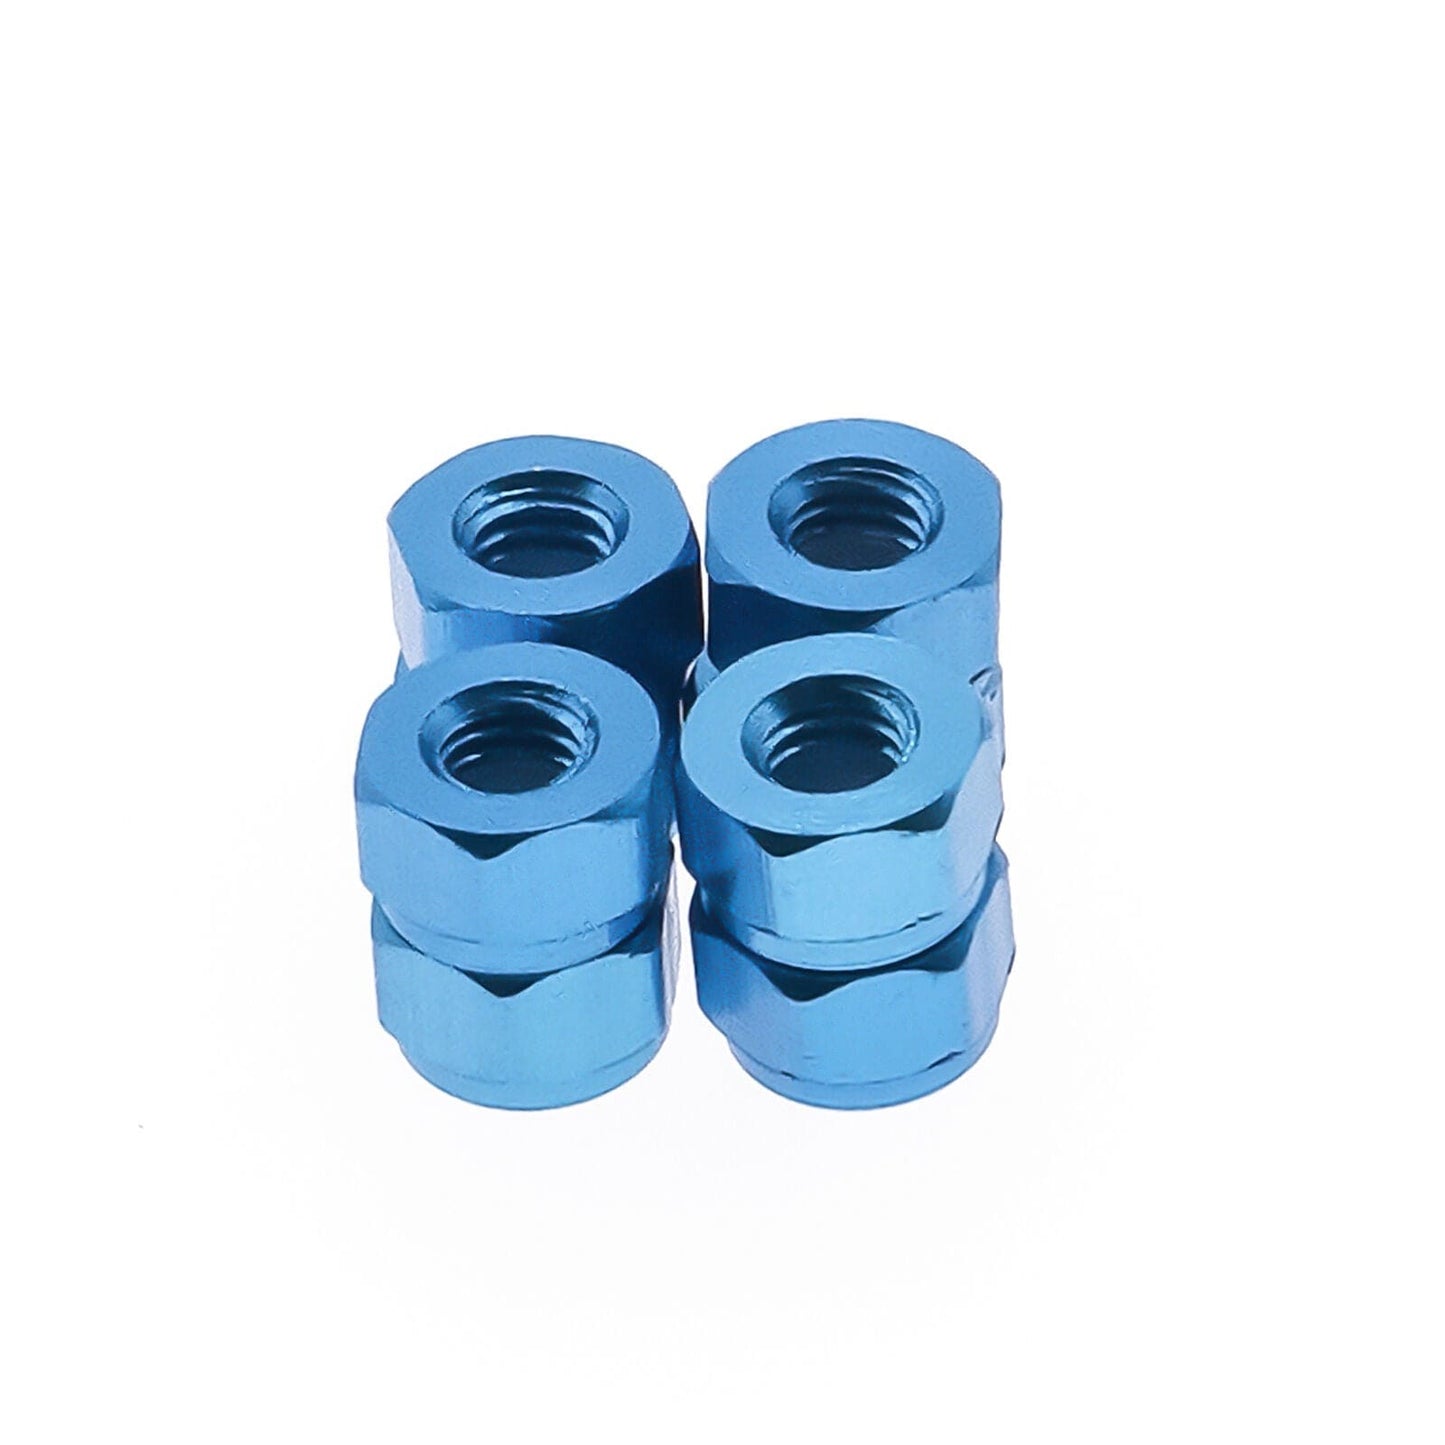 RCAWD ECX UPGRADE PARTS Blue RCAWD M3 Wheel Hex Lock Nut Tire Nut ECX1059 For RC Hobby Car 1-10 ECX 2WD Series 8PCS